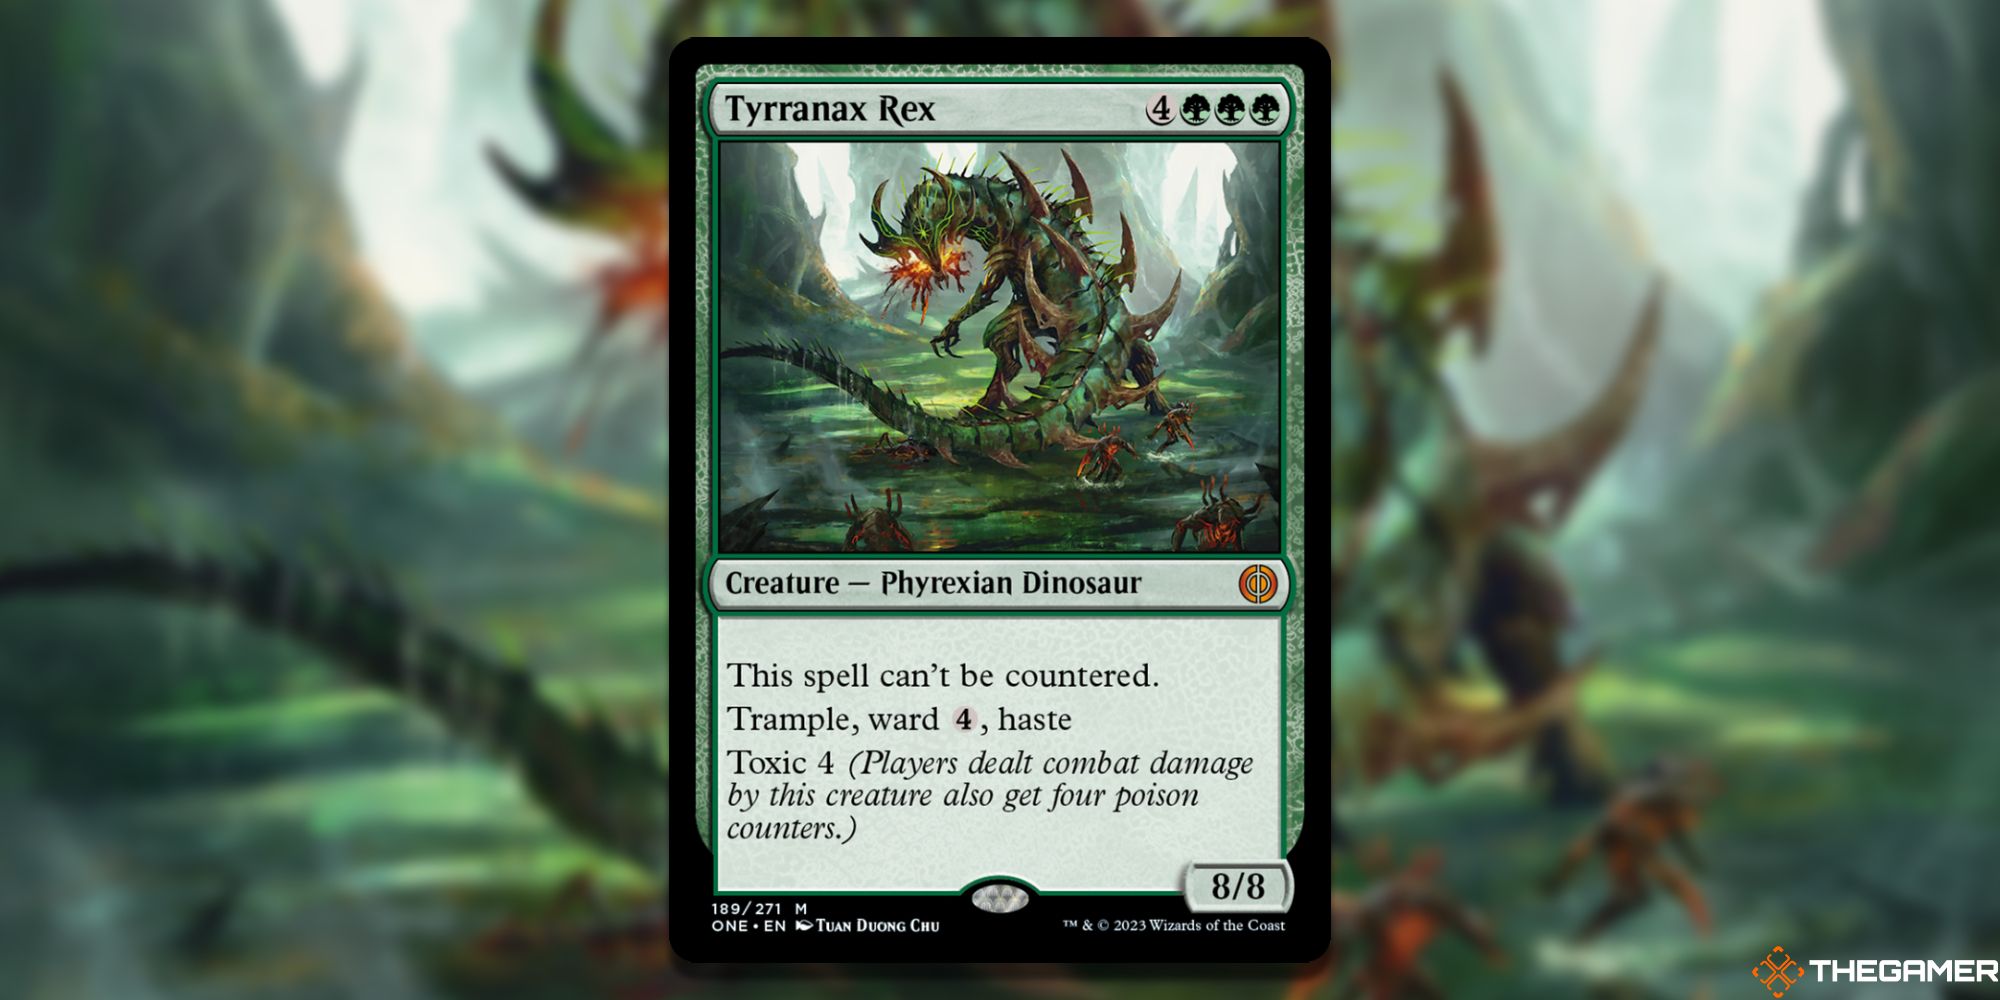 The card Tyrranax Rex from Magic: The Gathering.